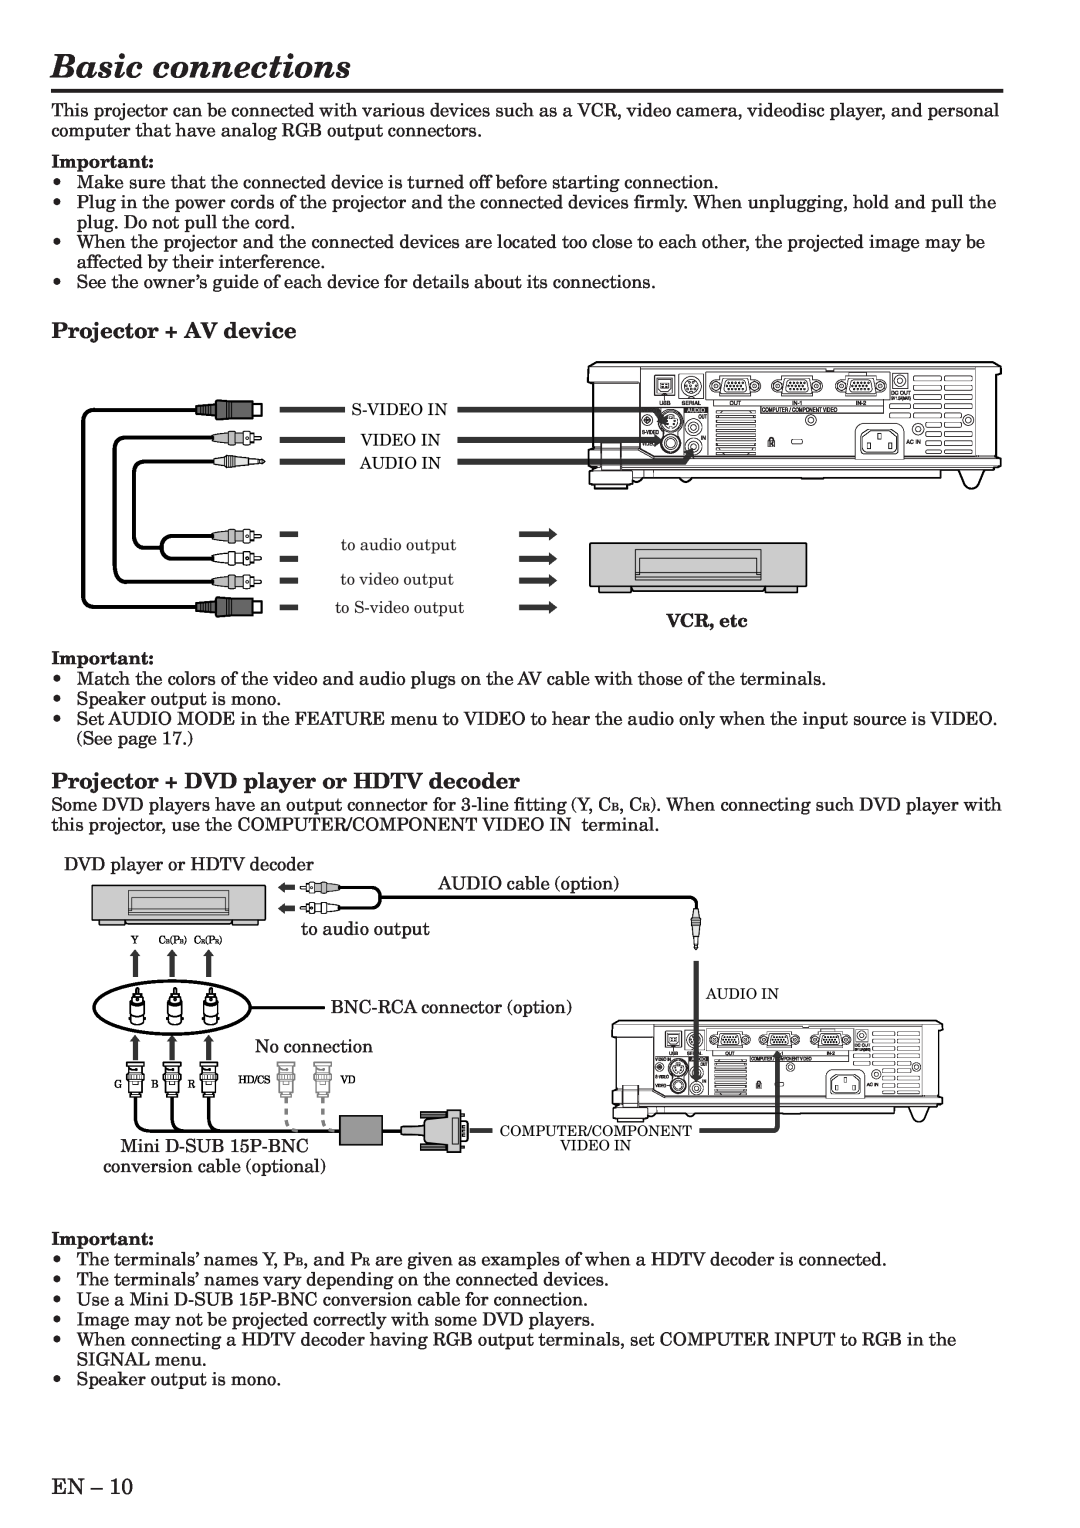 Mitsubishi Electronics XL6U user manual Basic connections, Projector + AV device, Projector + DVD player or HDTV decoder 